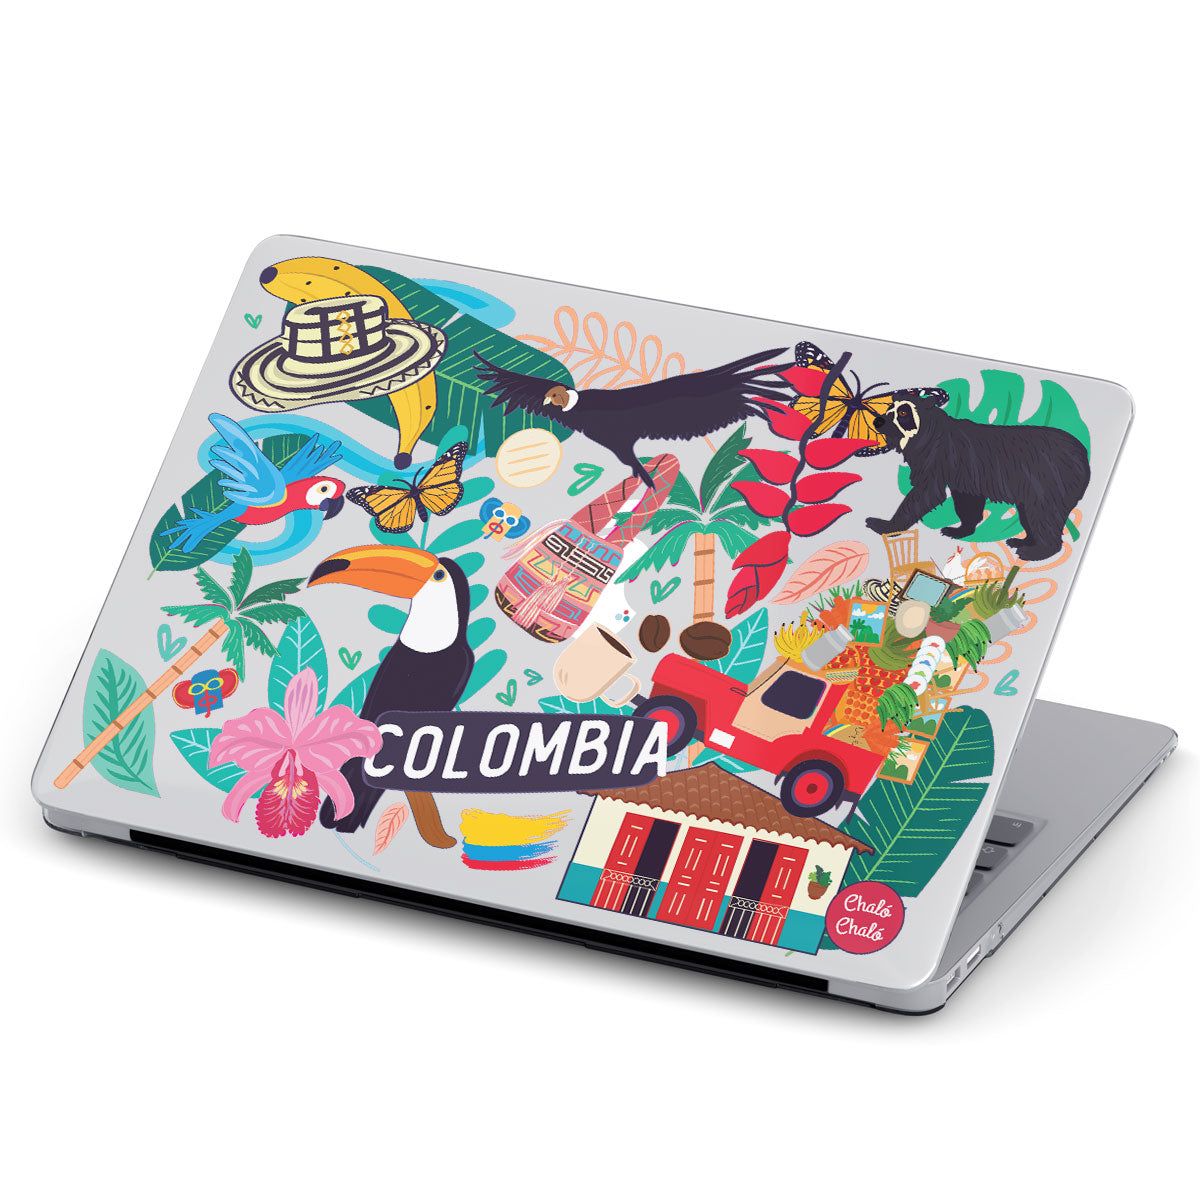 Hard Case para Macbook - Colombia Insignia - Chaló Chaló